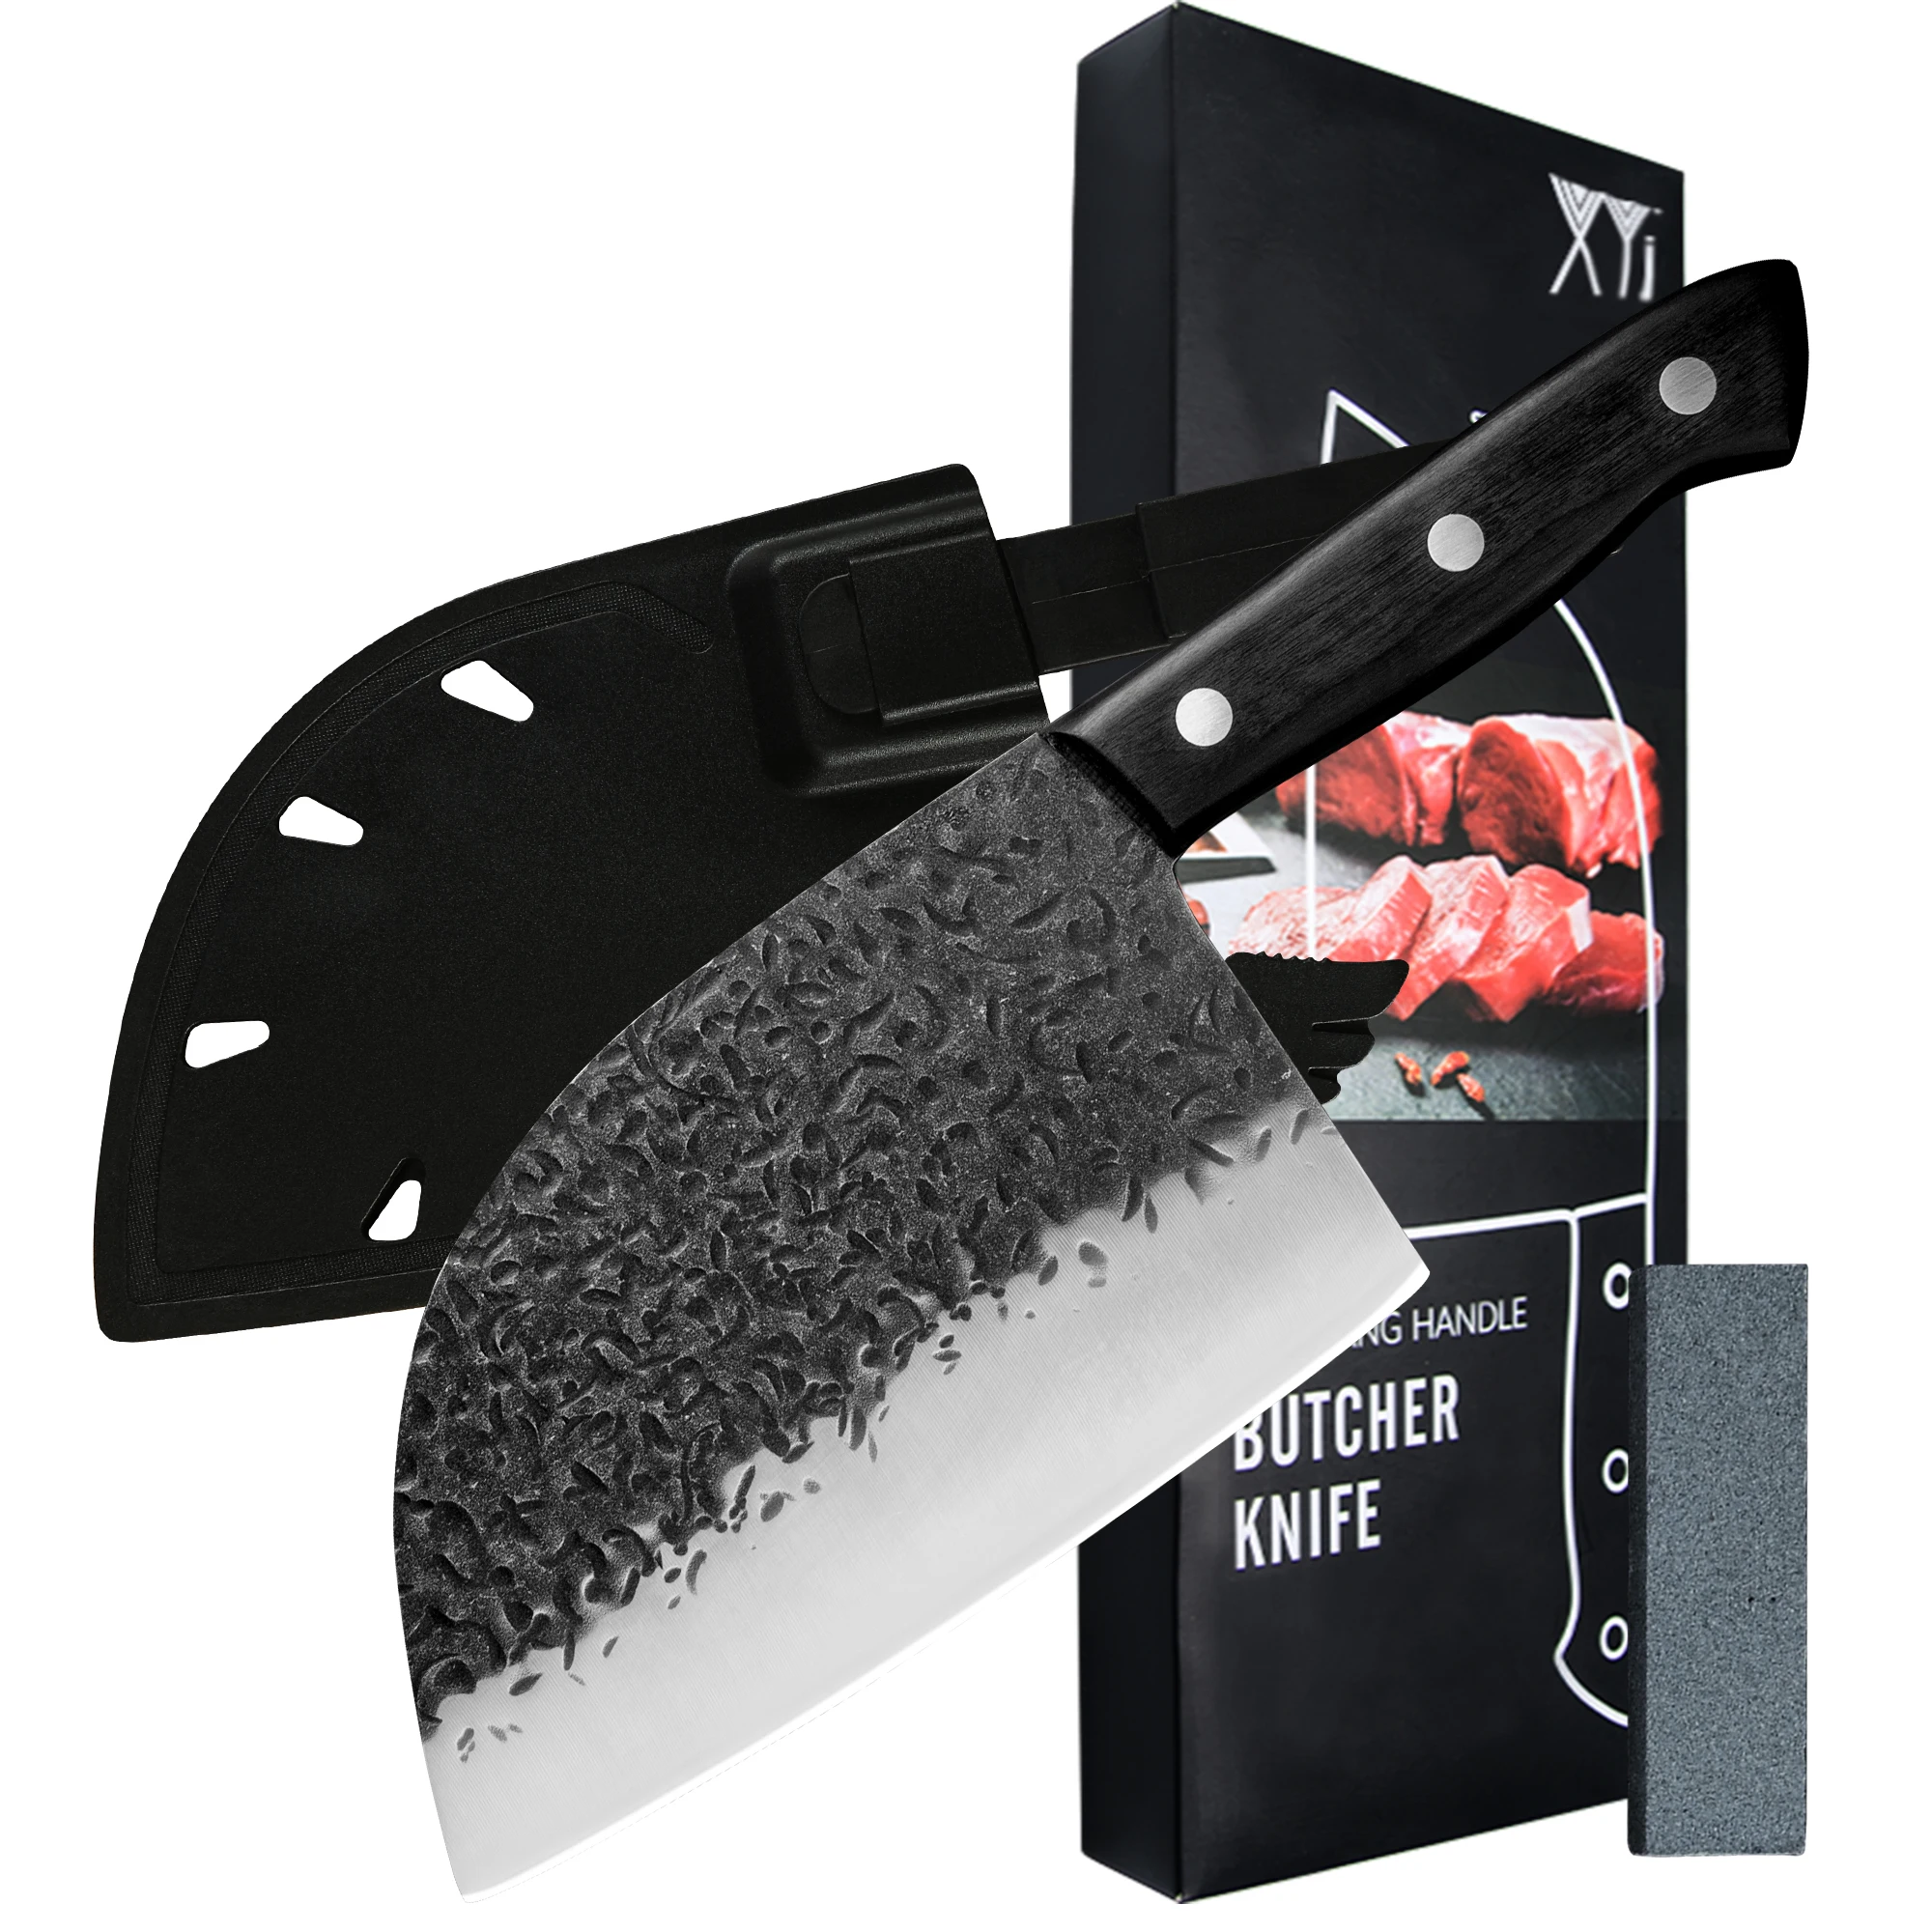 

XYJ 7 Inch Full Tang Butcher Knife Set Non-stick Blade Stainless Steel Chef Cleaver Knives With Plastic Sheath And Whetstone